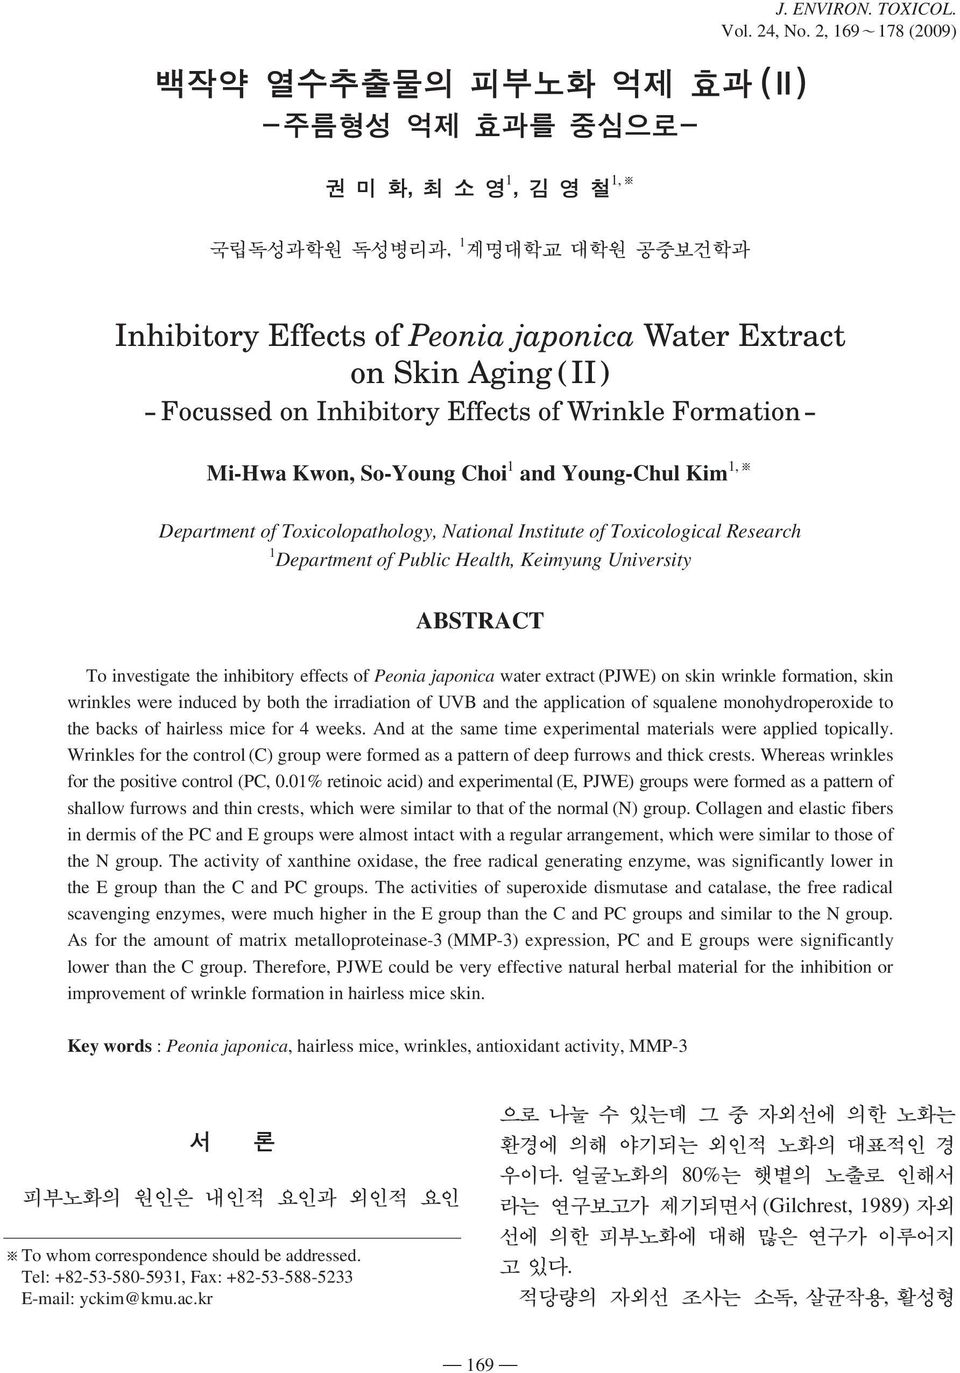 Choi 1 and Young-Chul Kim 1, Department of Toxicolopathology, National Institute of Toxicological Research 1 Department of Public Health, Keimyung University ABSTRACT To investigate the inhibitory